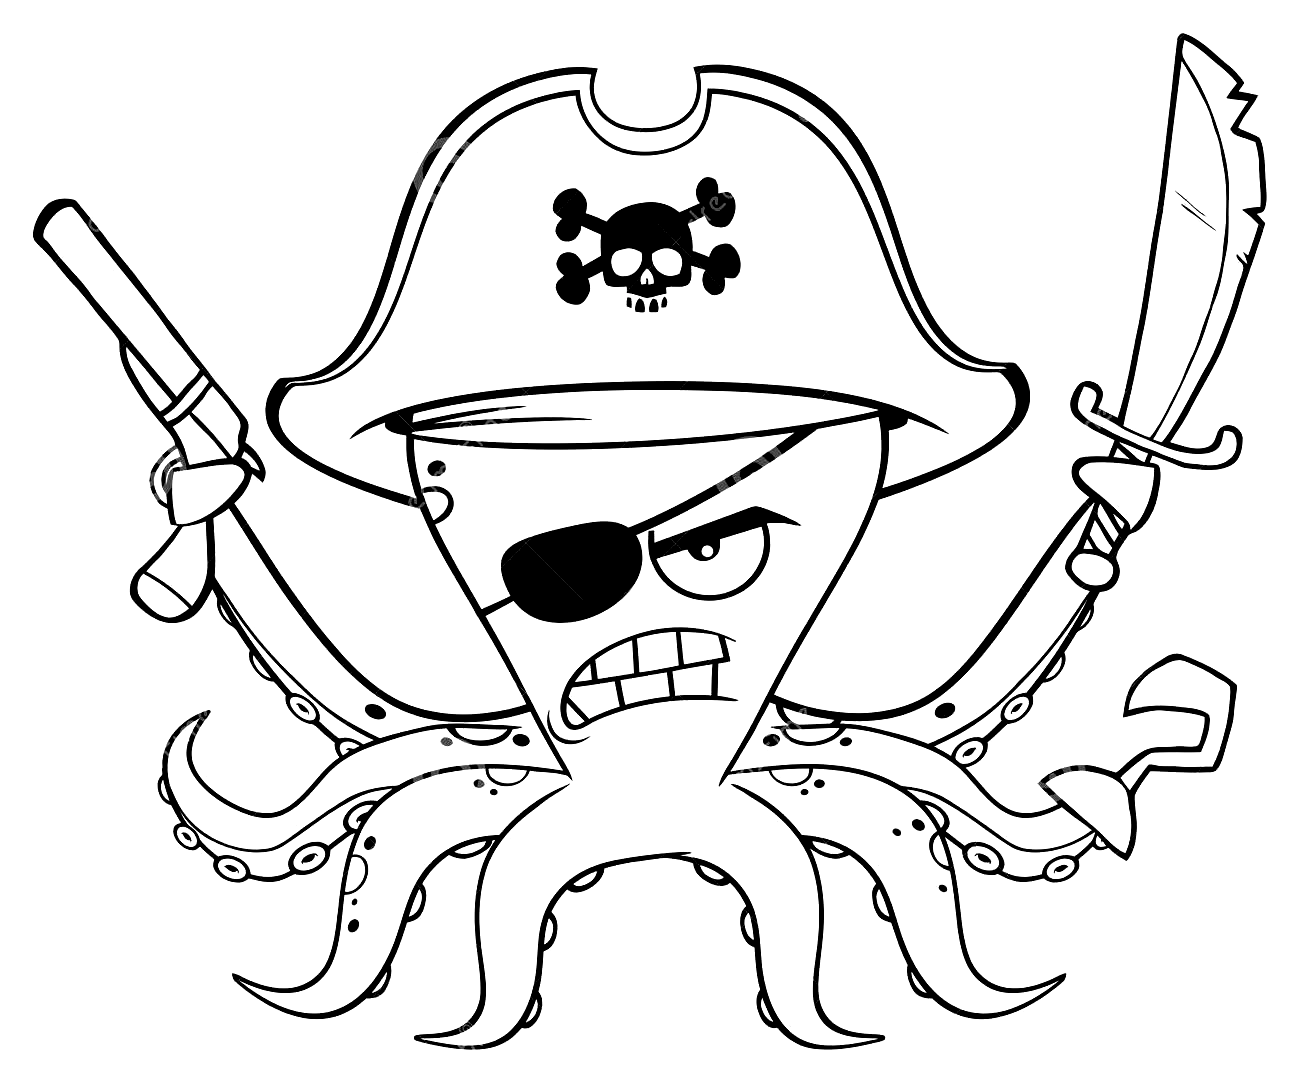 Angry Pirate Octopus Coloring Page